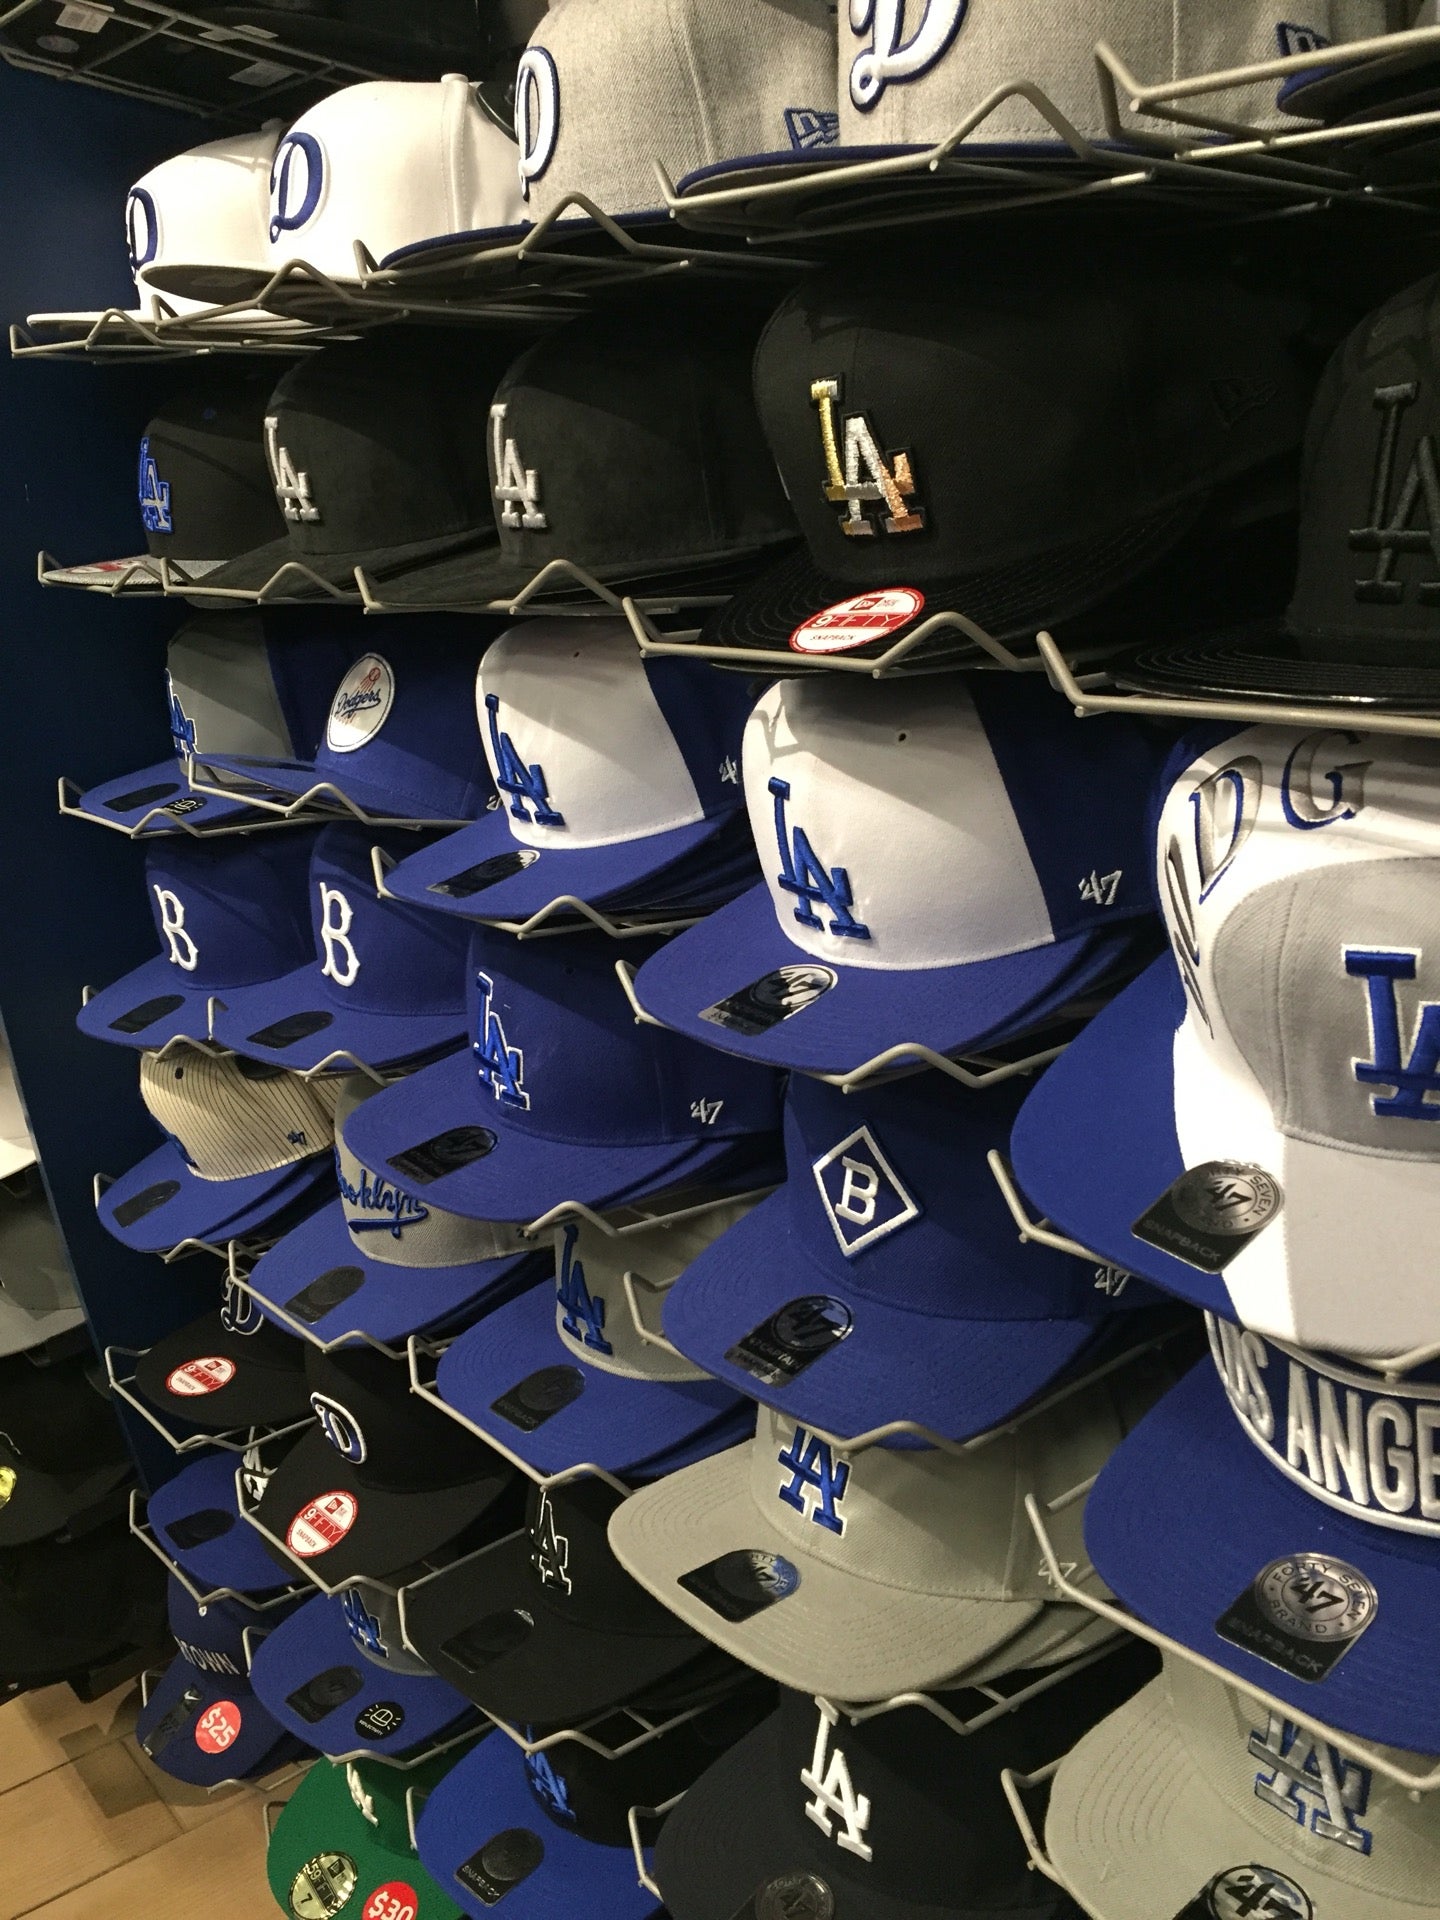 Dodgers Clubhouse, 6801 Hollywood Blvd, Los Angeles, CA, Men's